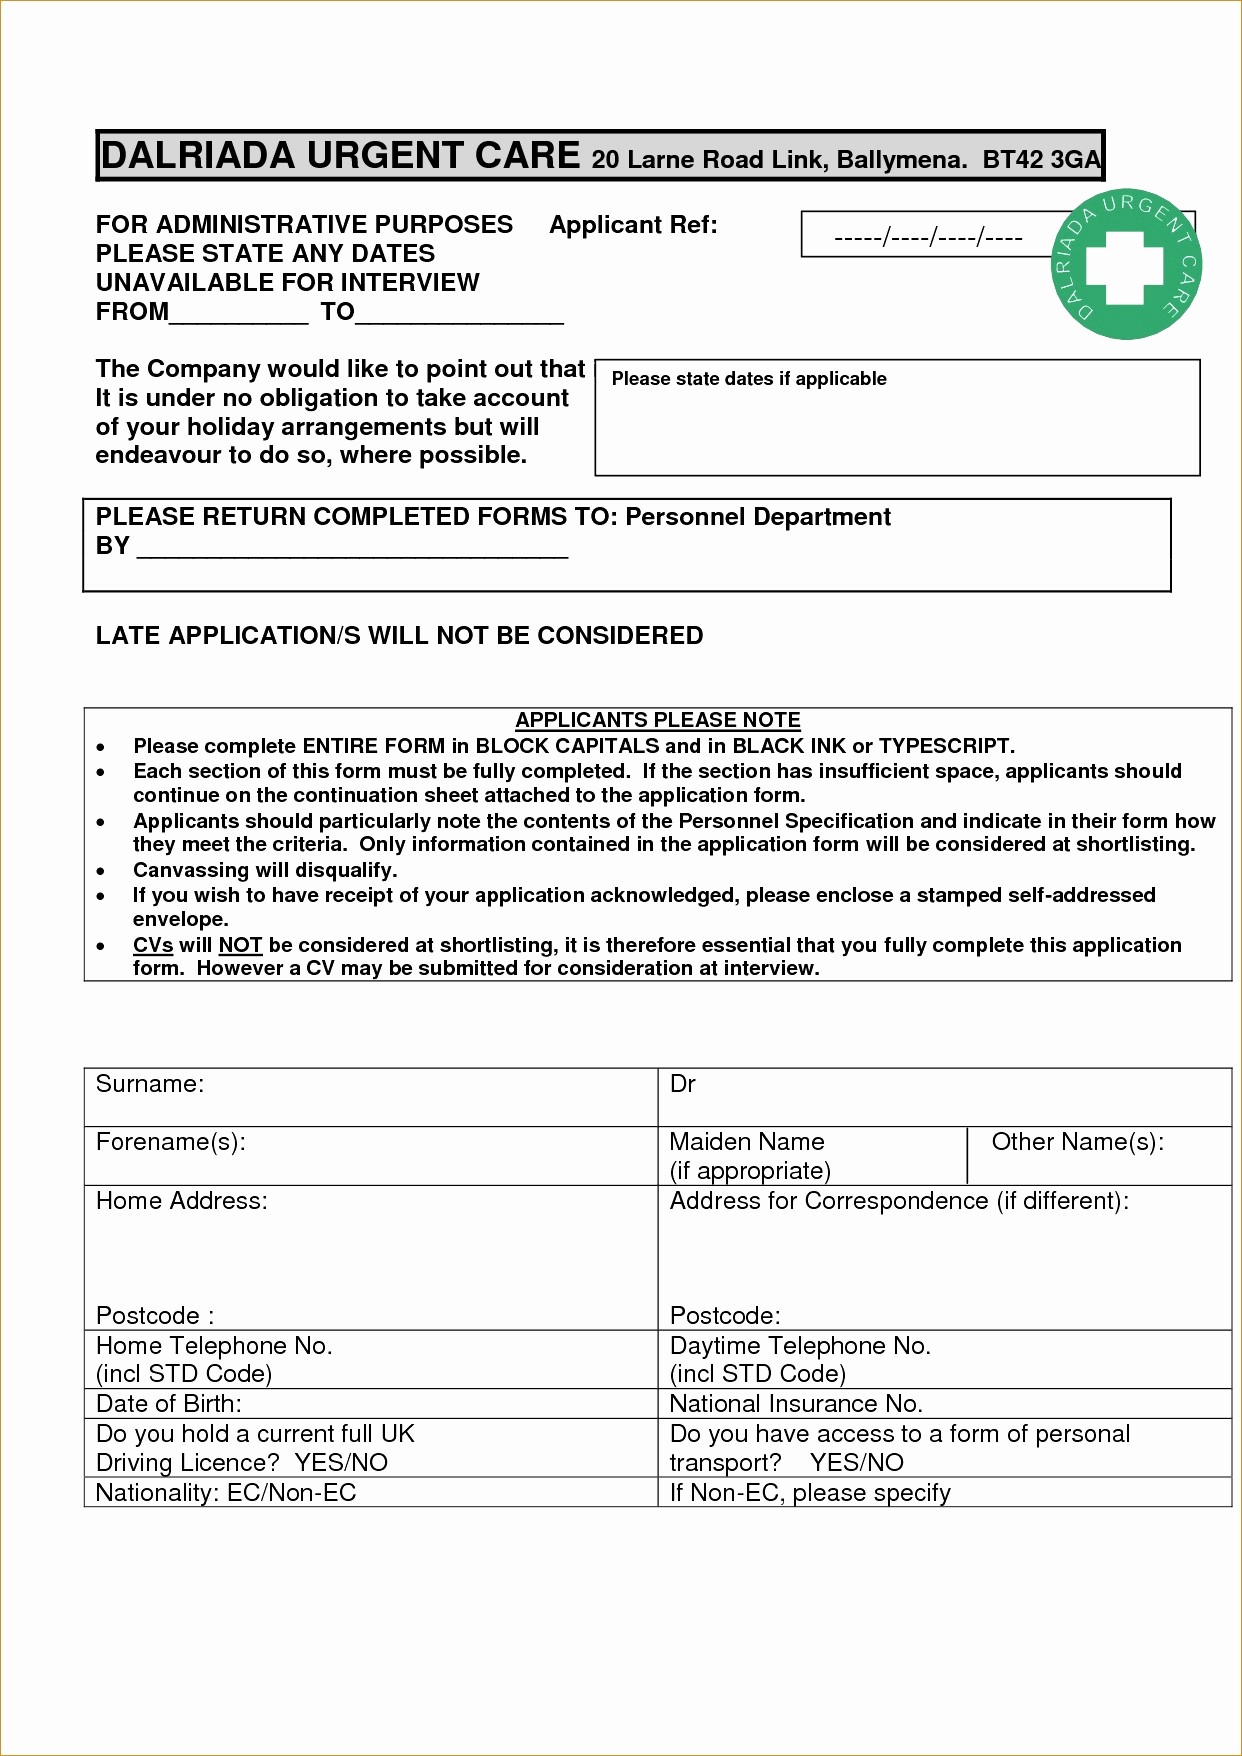 50 Unique Printable Fake Hospital Discharge Papers DOCUMENT IDEAS Document Free